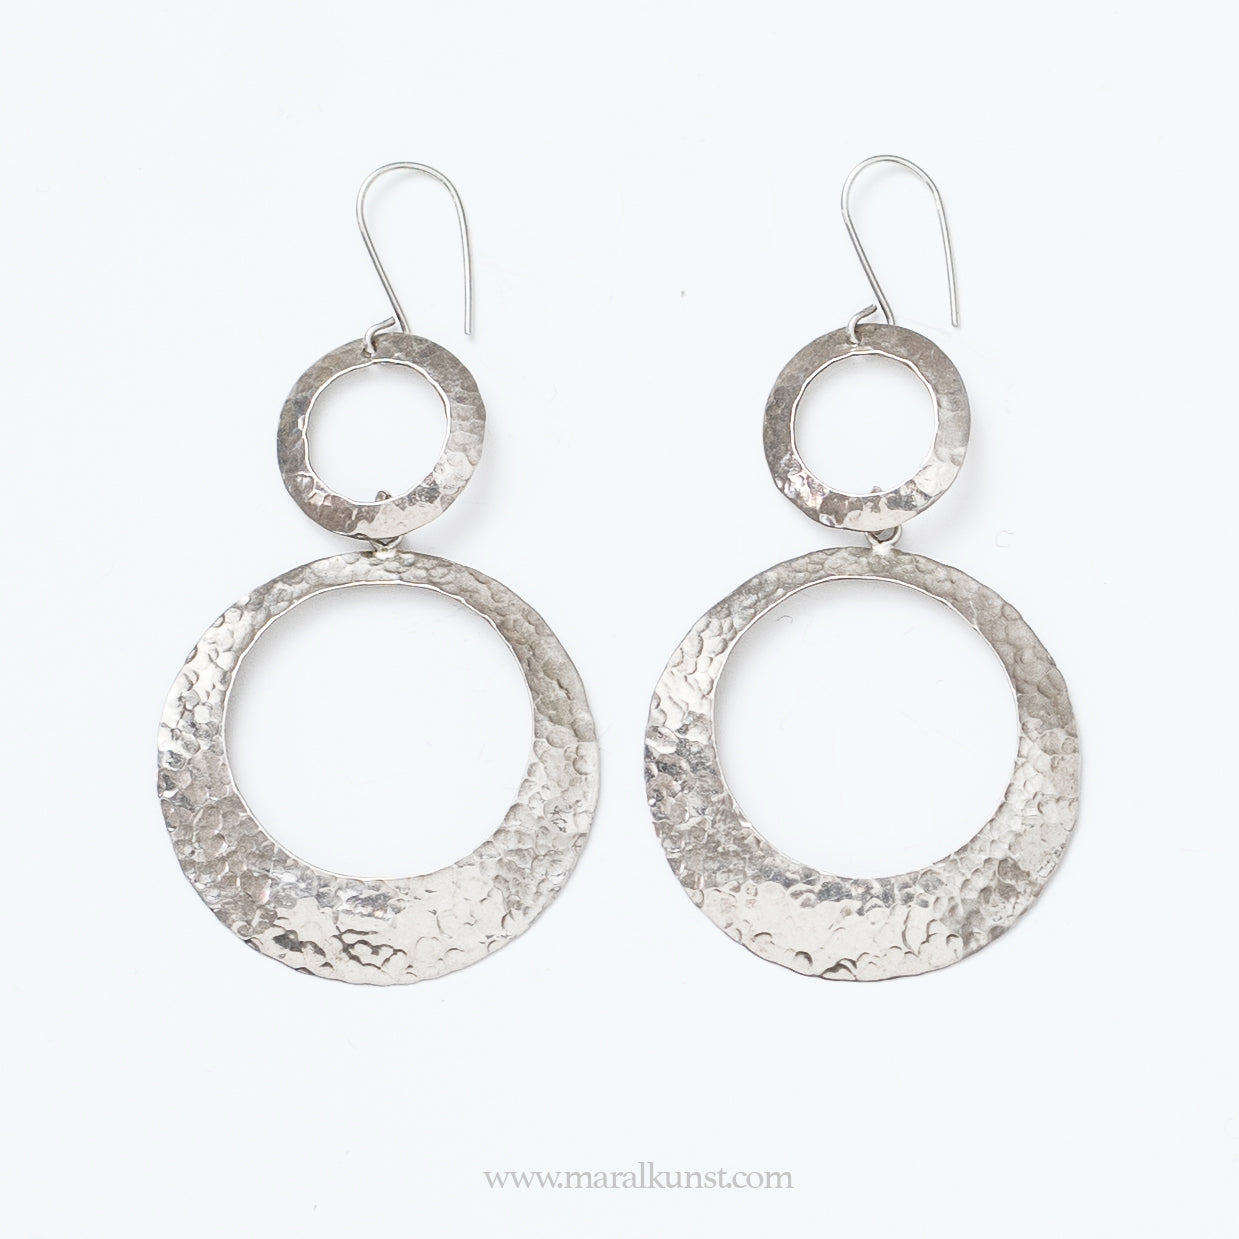 Drop circle Mexican 925 silver earrings